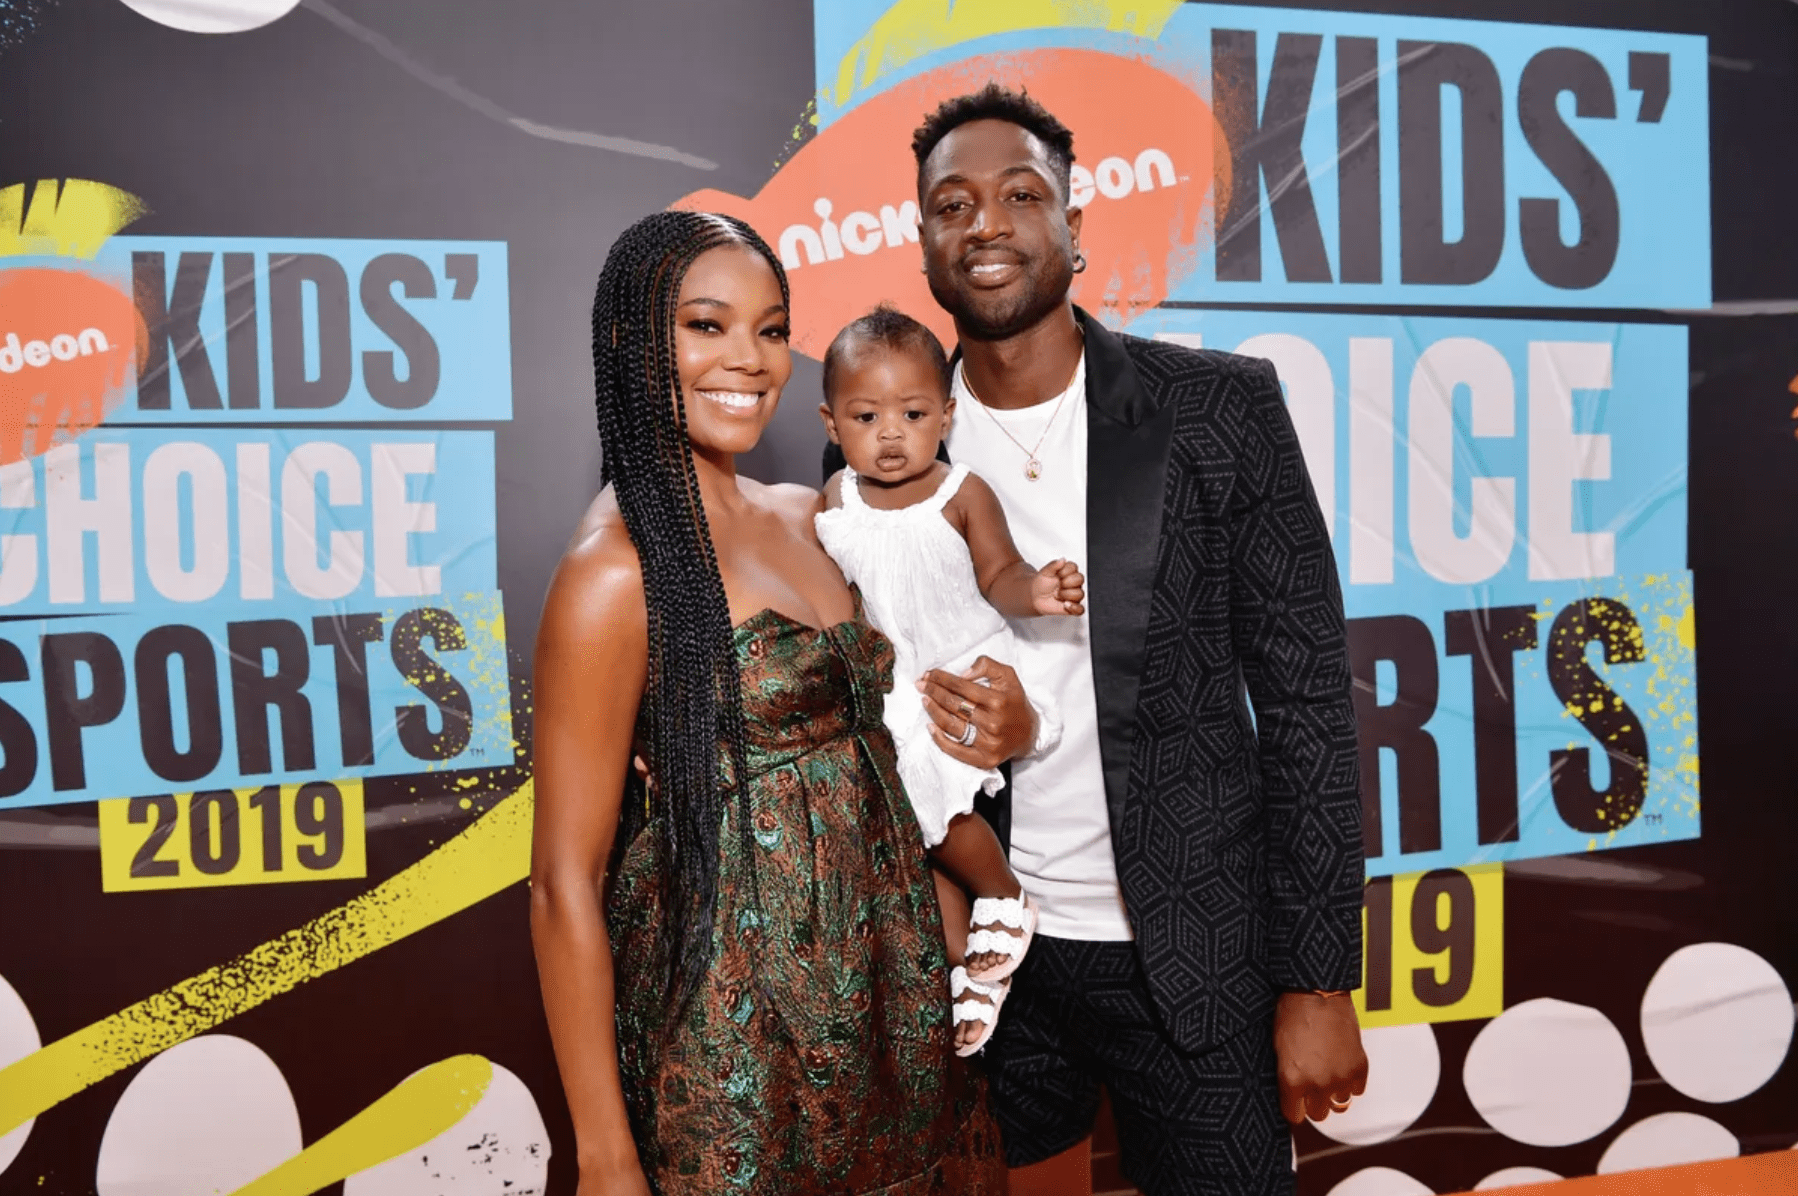 Gabrielle Union and Dwyane Wade with their daughter, Kaavia James, attending Nickelodeon Kids' Choice Sports 2019 on July 11, 2019. | Source: Getty Images